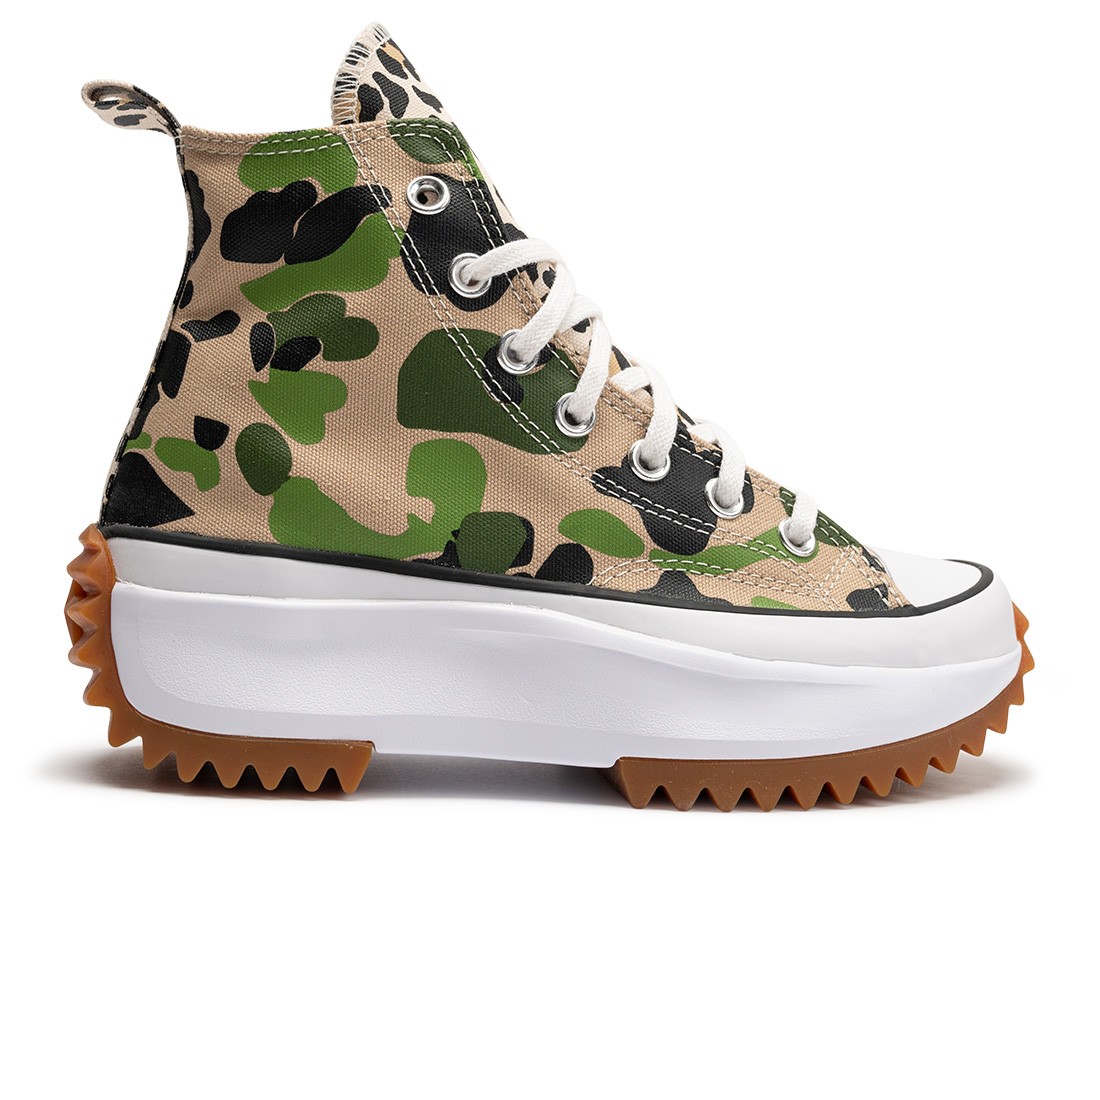 Buy CONVERSE Camouflage Run Star Hike High-top Sneakers - Green At 40% Off  | Editorialist